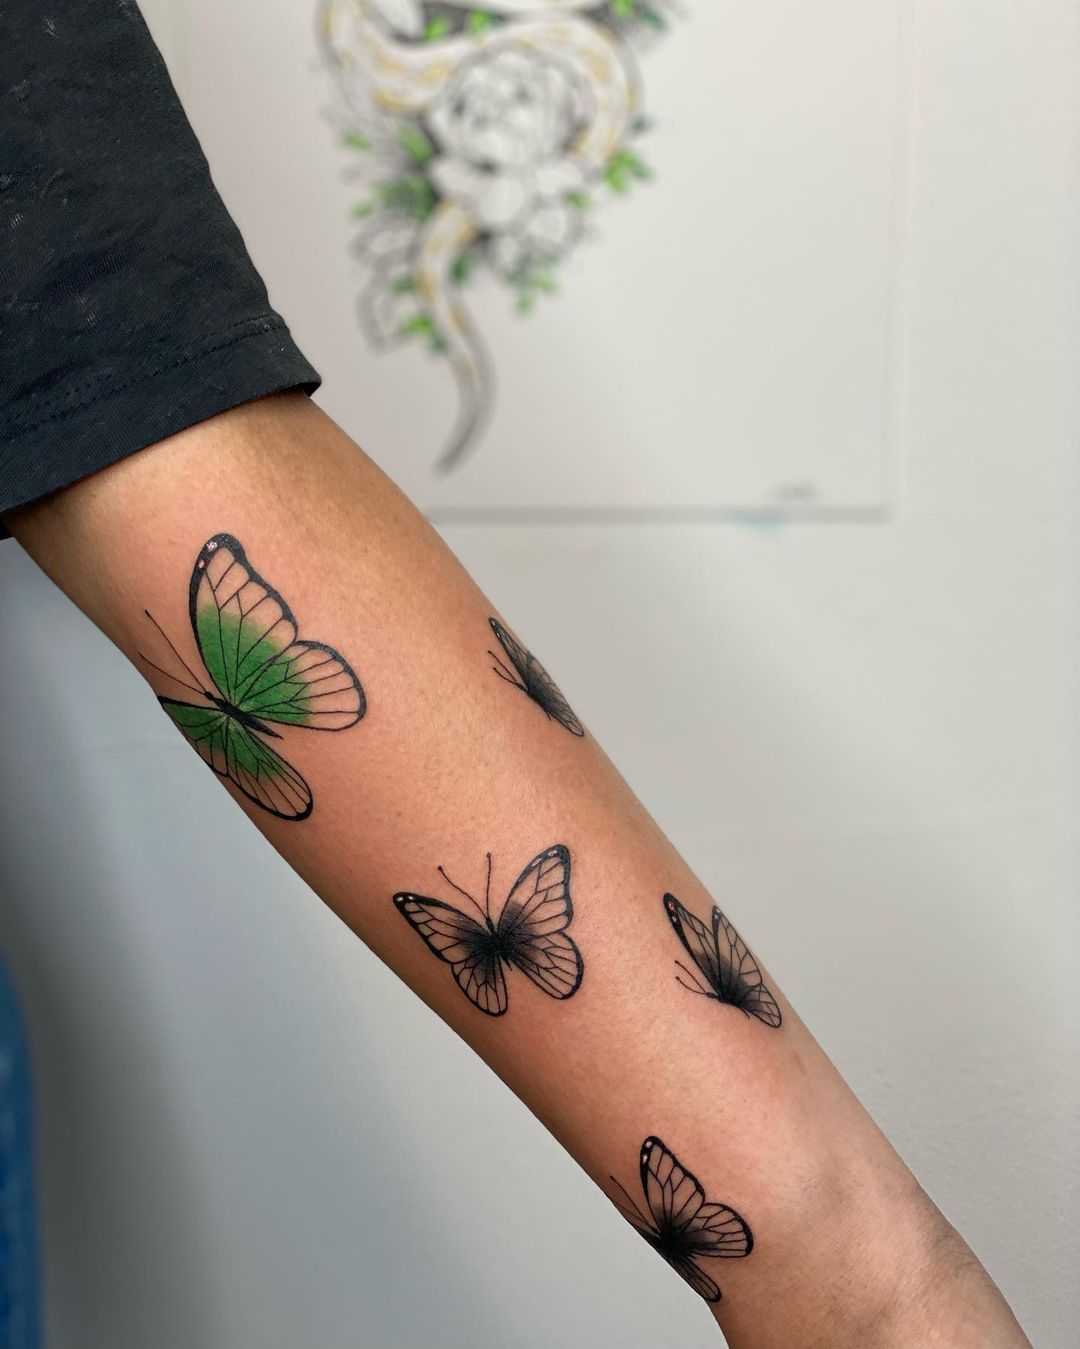 30+ Best Butterfly Tattoos Design You’ll Love To Get Next. Butterfly Tattoos on Hand